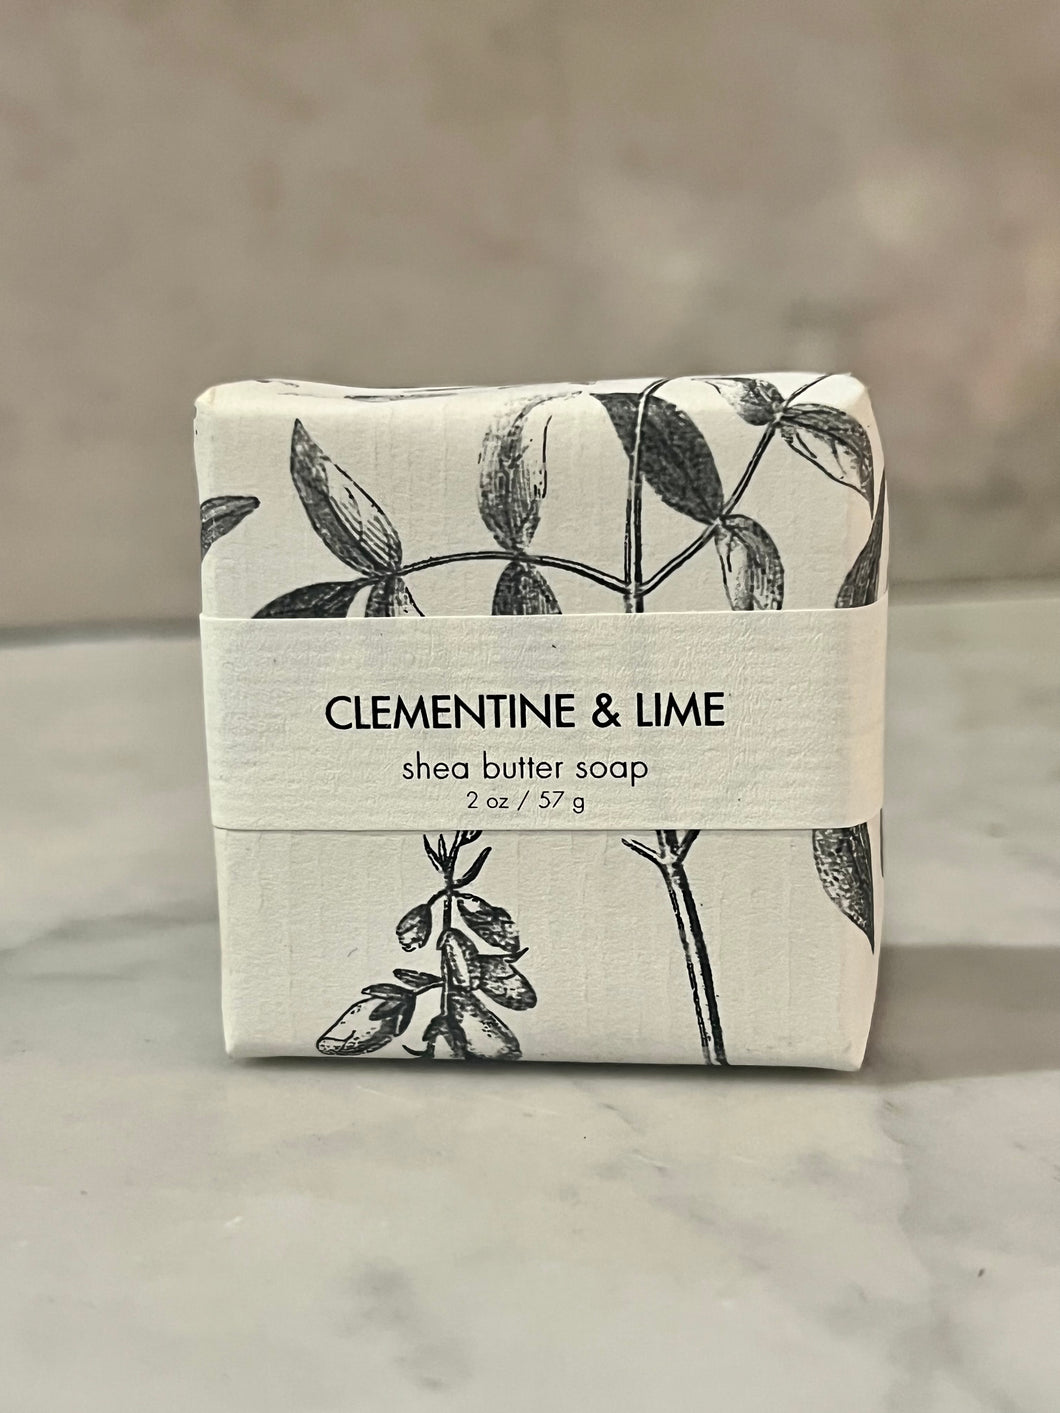 Clementine & Lime Petite Shea Butter Soap